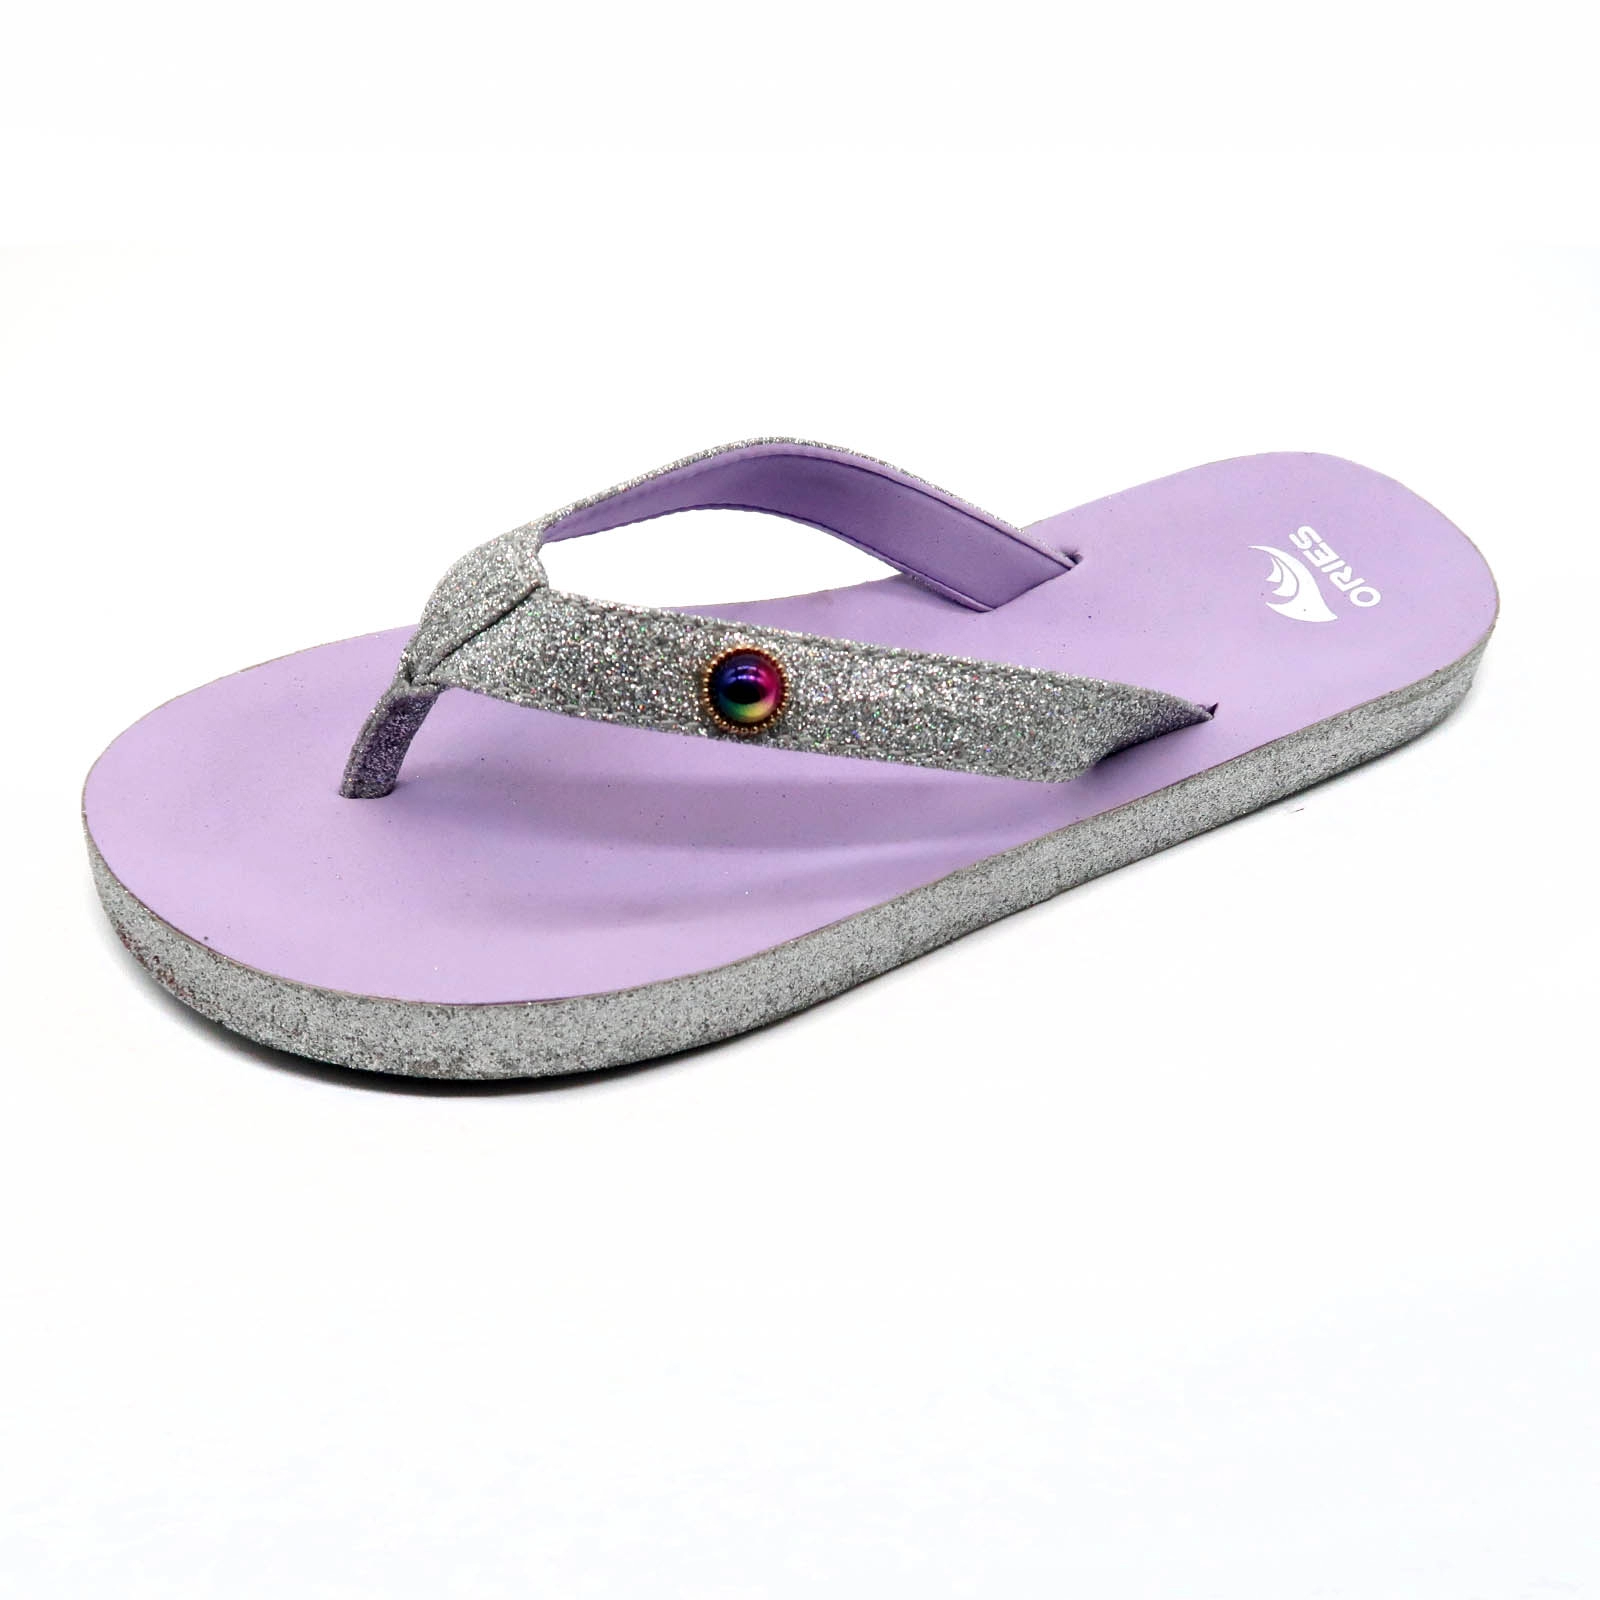 Gleit shinny material on sole edge and strap fashion girl Flip Flops Sandal